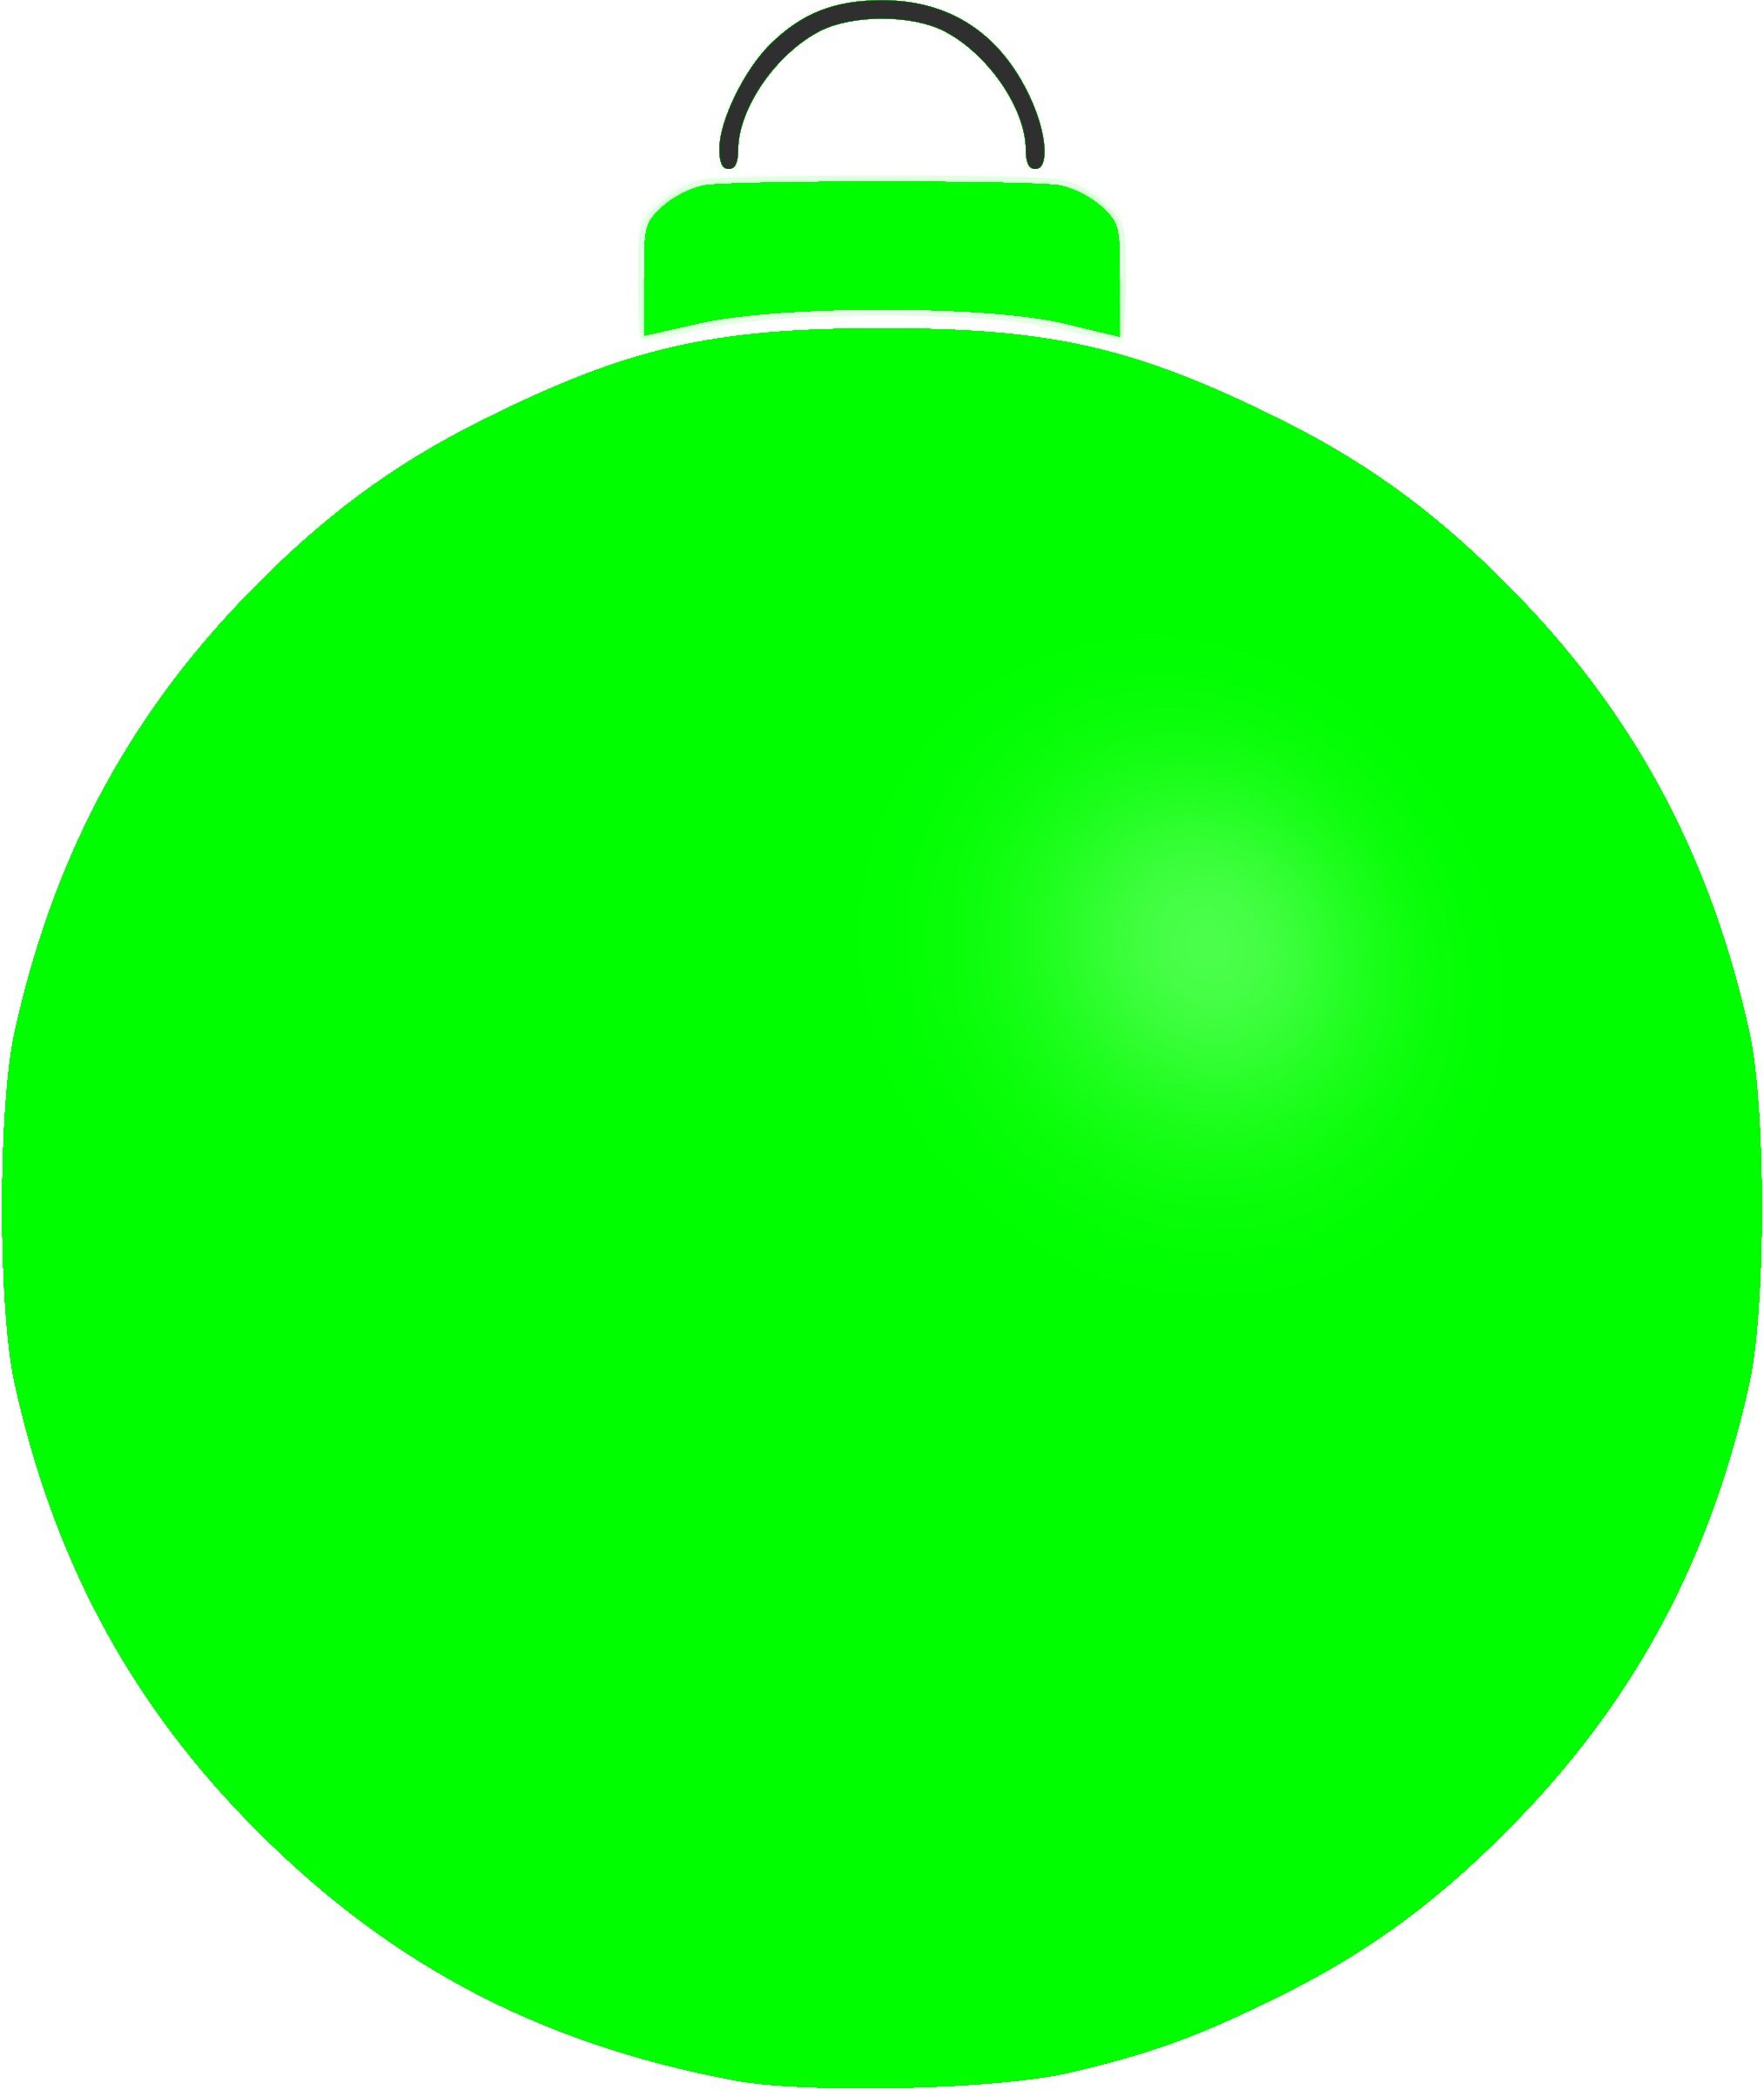 Green Christmas Bauble Free Transparent Image HQ PNG Image